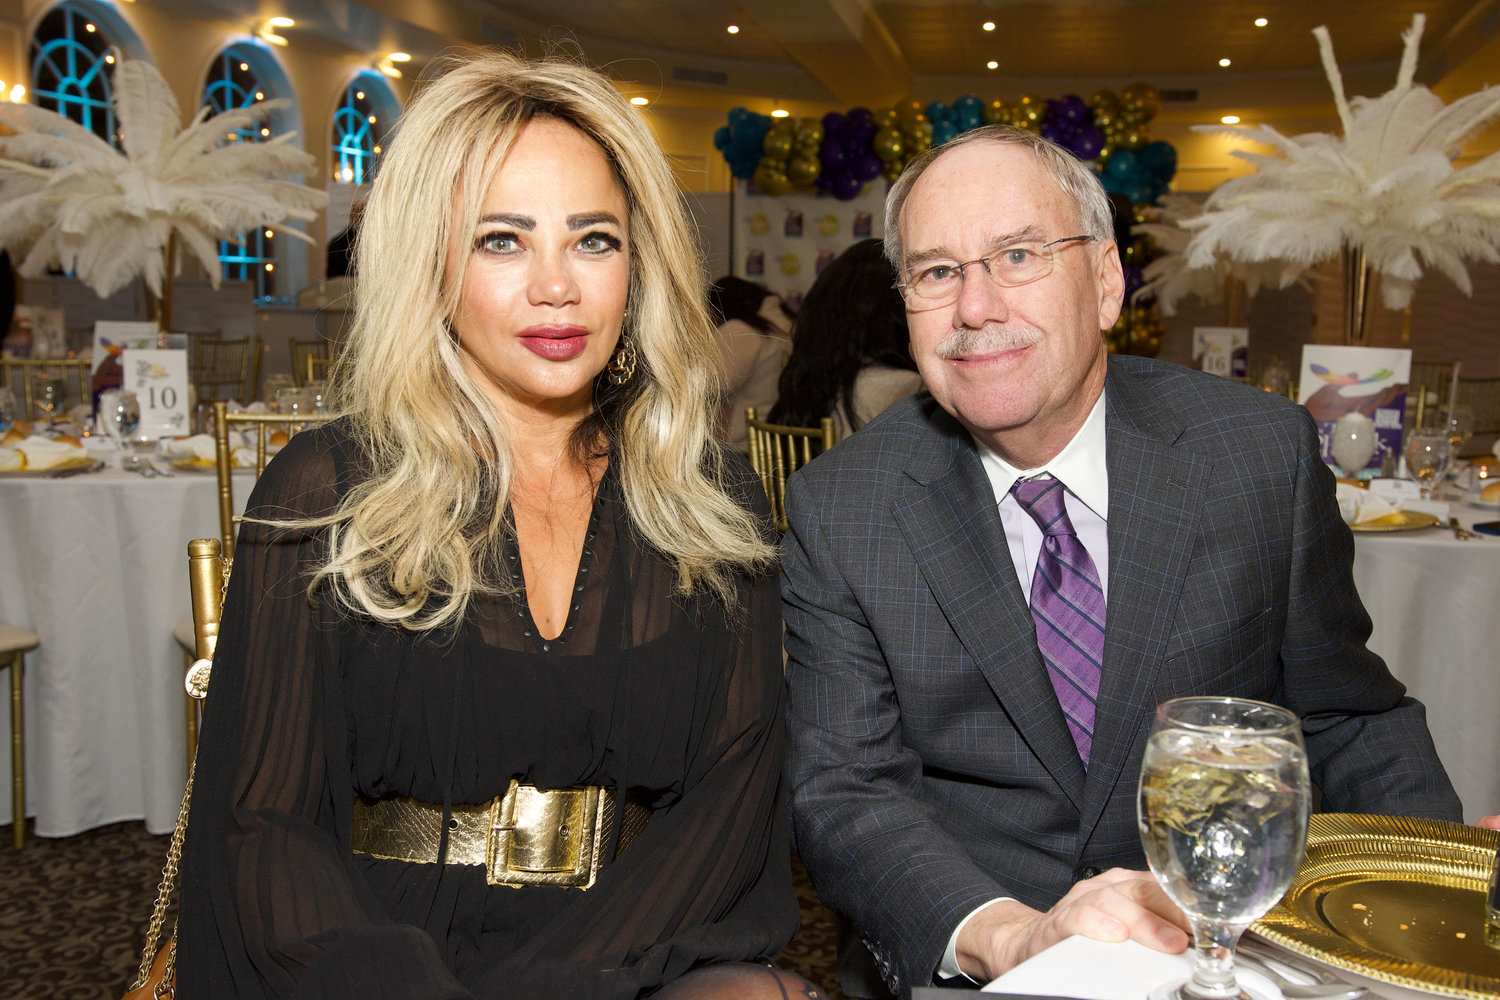 Summer Loannou and Ron Gold attended the Speak Hope Foundation’s 2nd Annual Gala at the Coral House last Sunday.